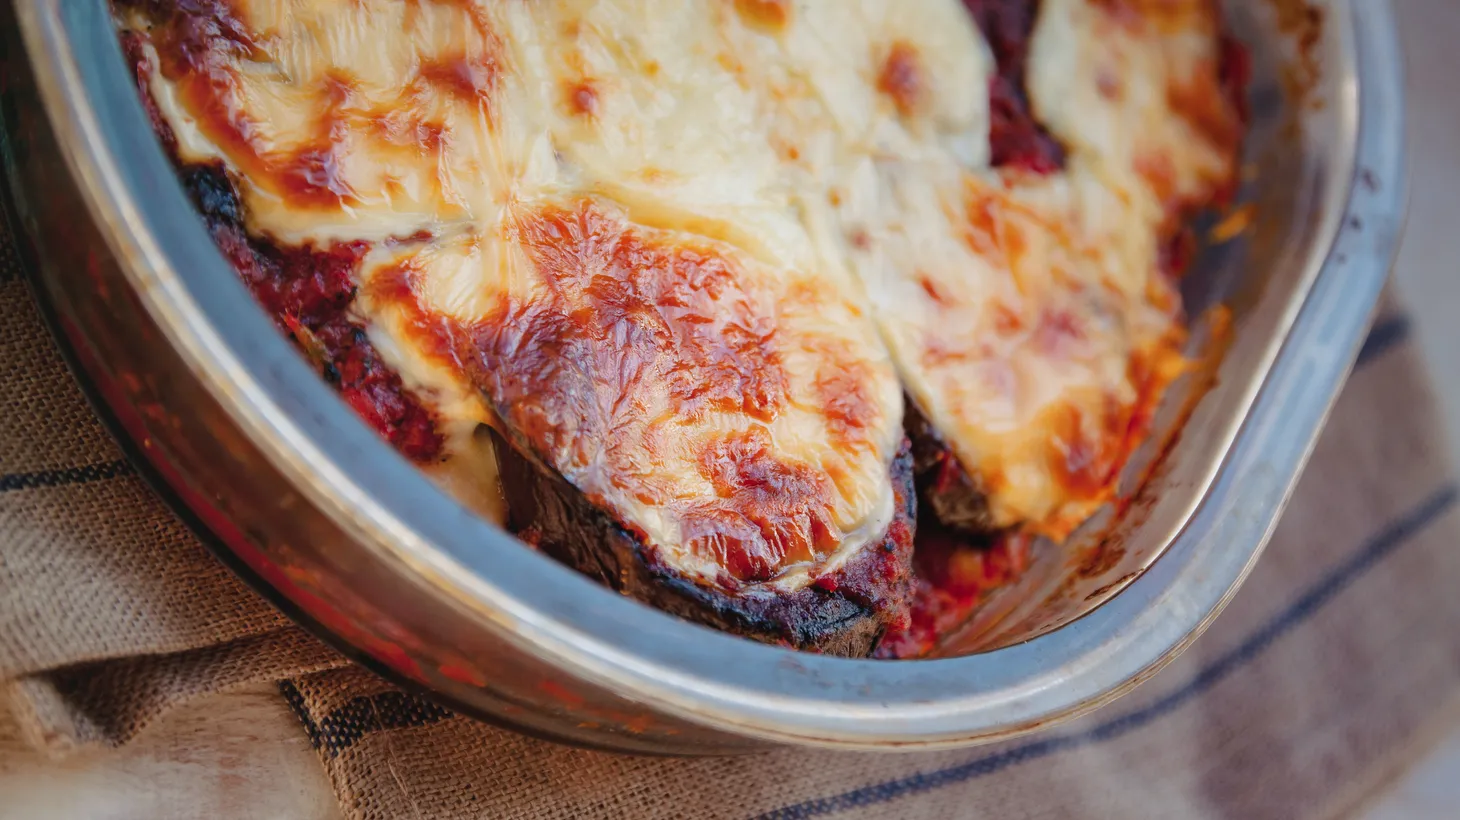 Cipolle alla parmigiana is the sweet taste of the onion with its yielding texture, layered with sauce and cheese.